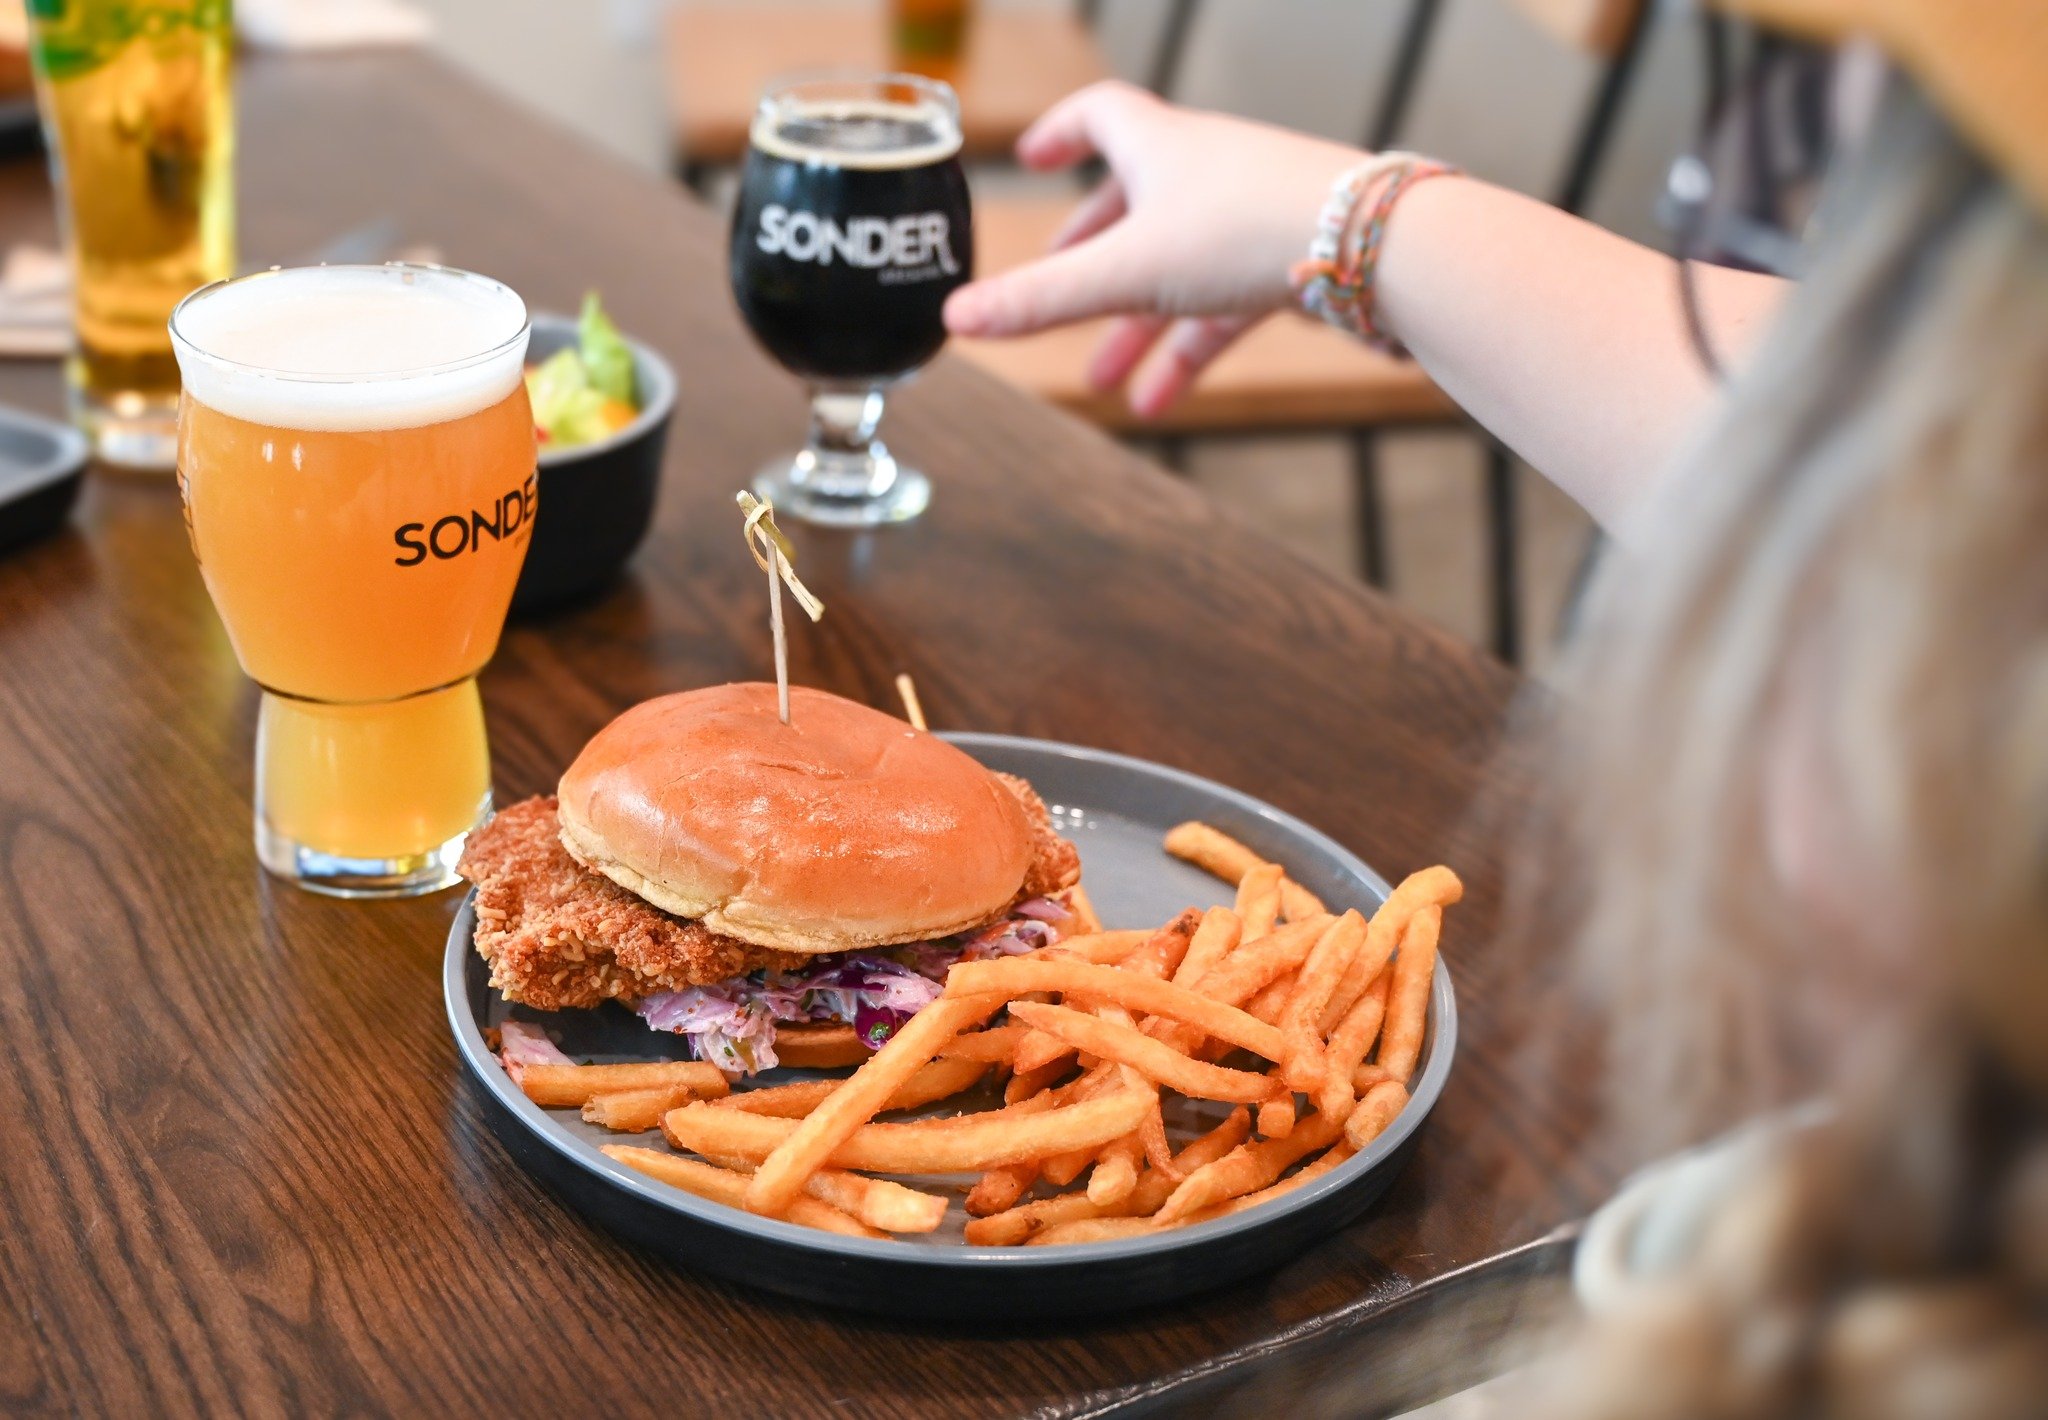 Our Ramen Fried Chicken Sandwich is the perfect lunch meal! Made with Brined Chicken Thighs, Ramen Noodle Breading, Asian Slaw, Pickles, You Betcha! Aioli, all packed between a Brioche Bun! Add a side of fries and a You Betcha! NE IPA to top it all o